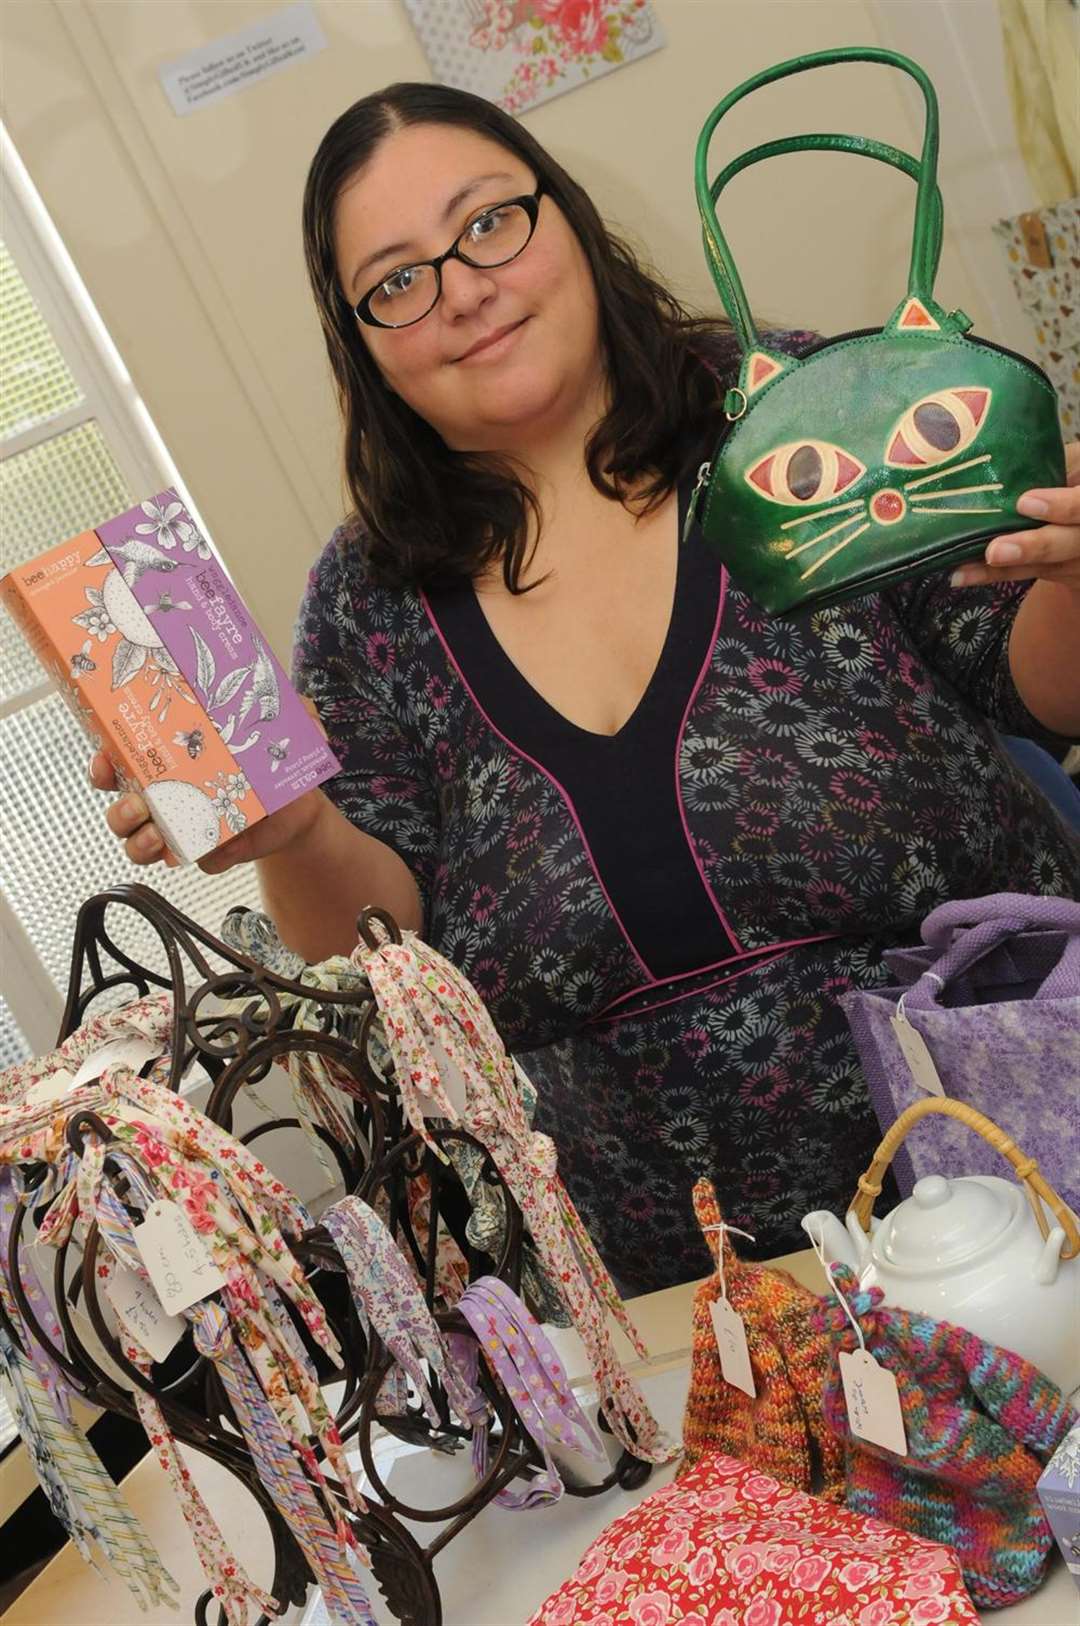 Emma Kerans, owner of Simply Gifted in Sandwich, is looking for artists